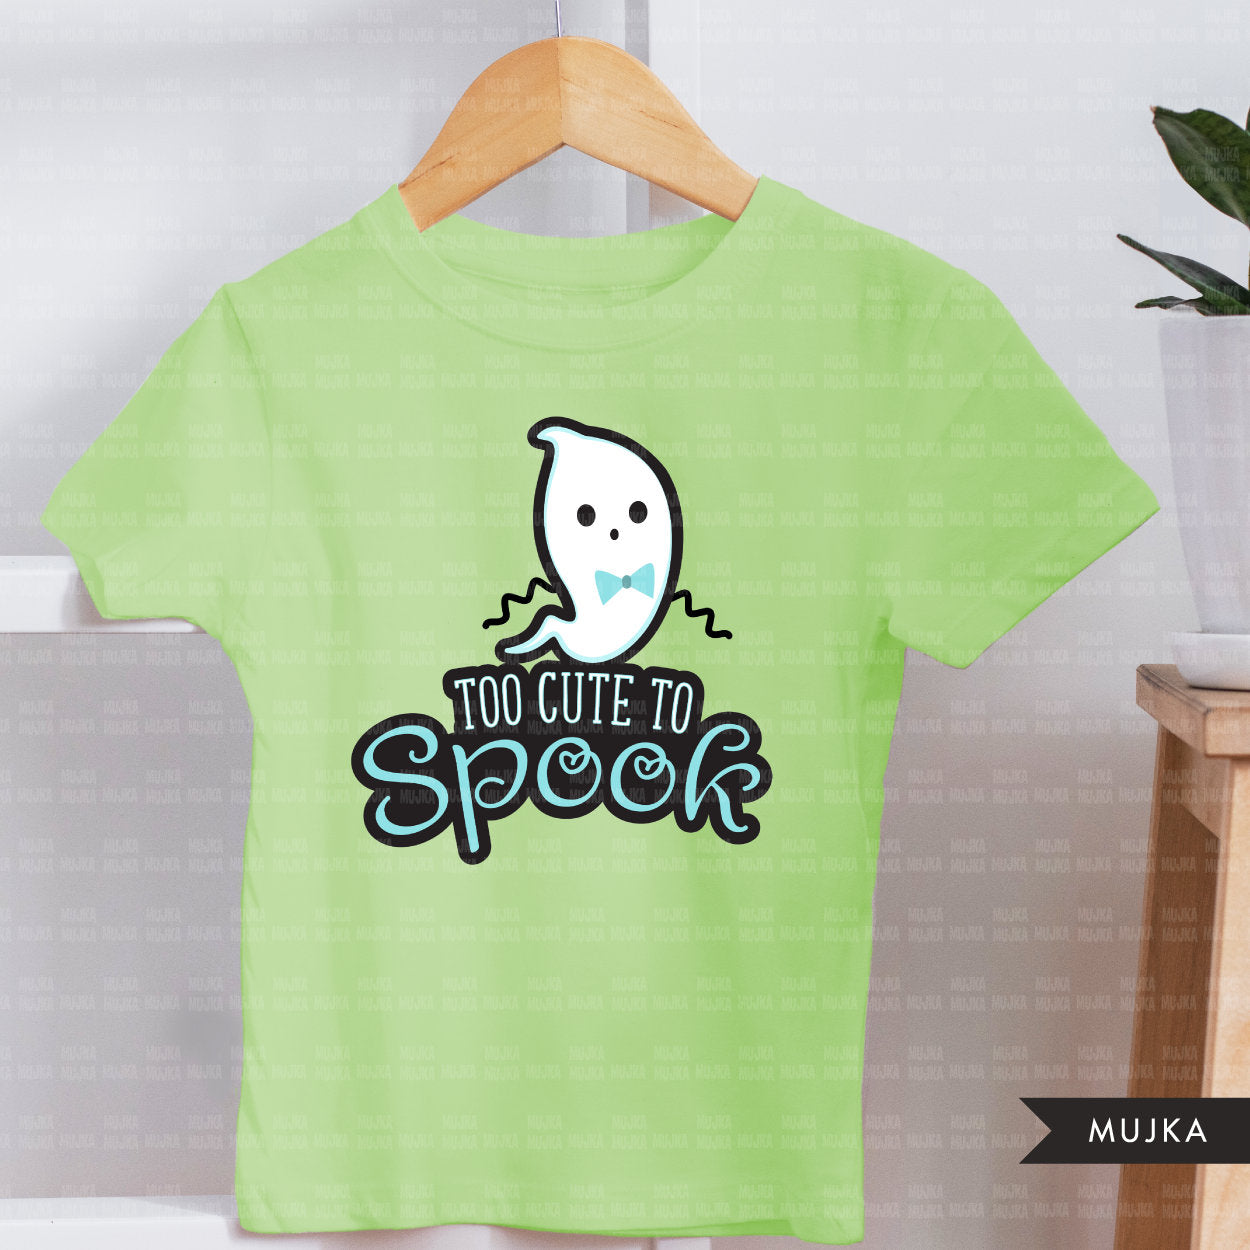 Too cute to spook png, Halloween clipart, ghost clipart, Halloween sublimation designs digital download, cute ghost png, cute baby boy shirt